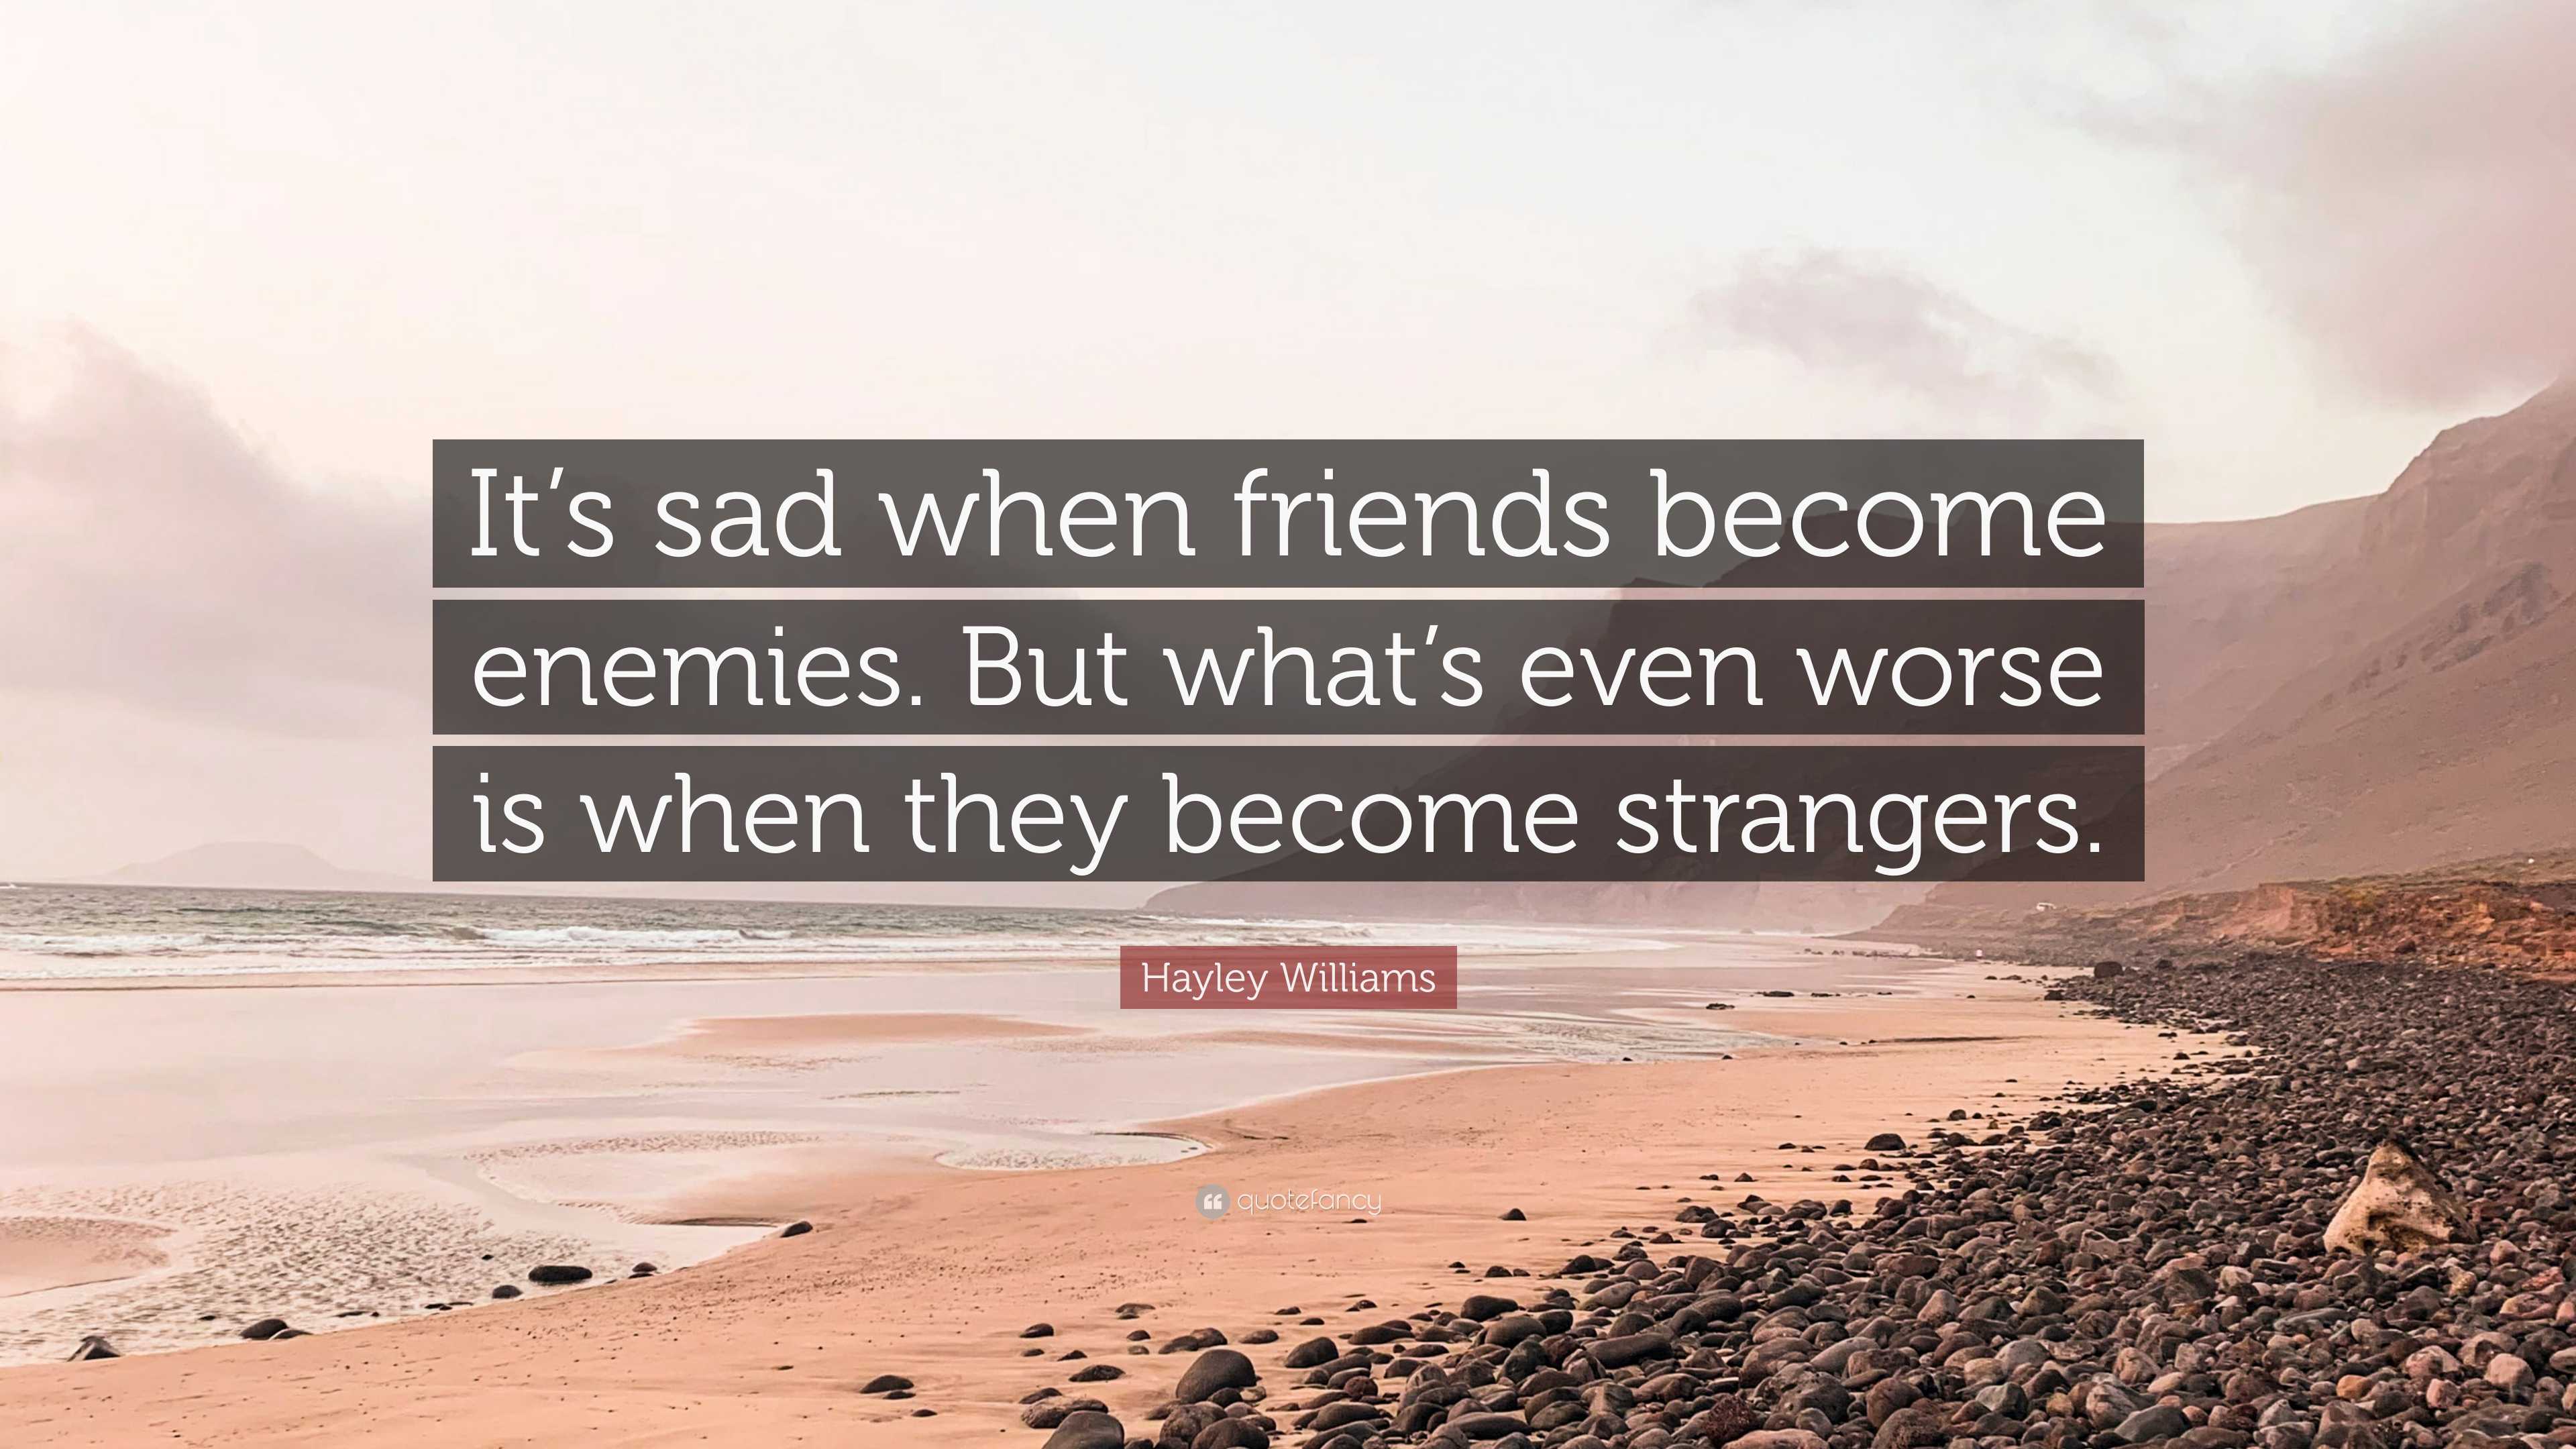 Hayley Williams Quote: “It's sad when friends become enemies. But what's  even worse is when they